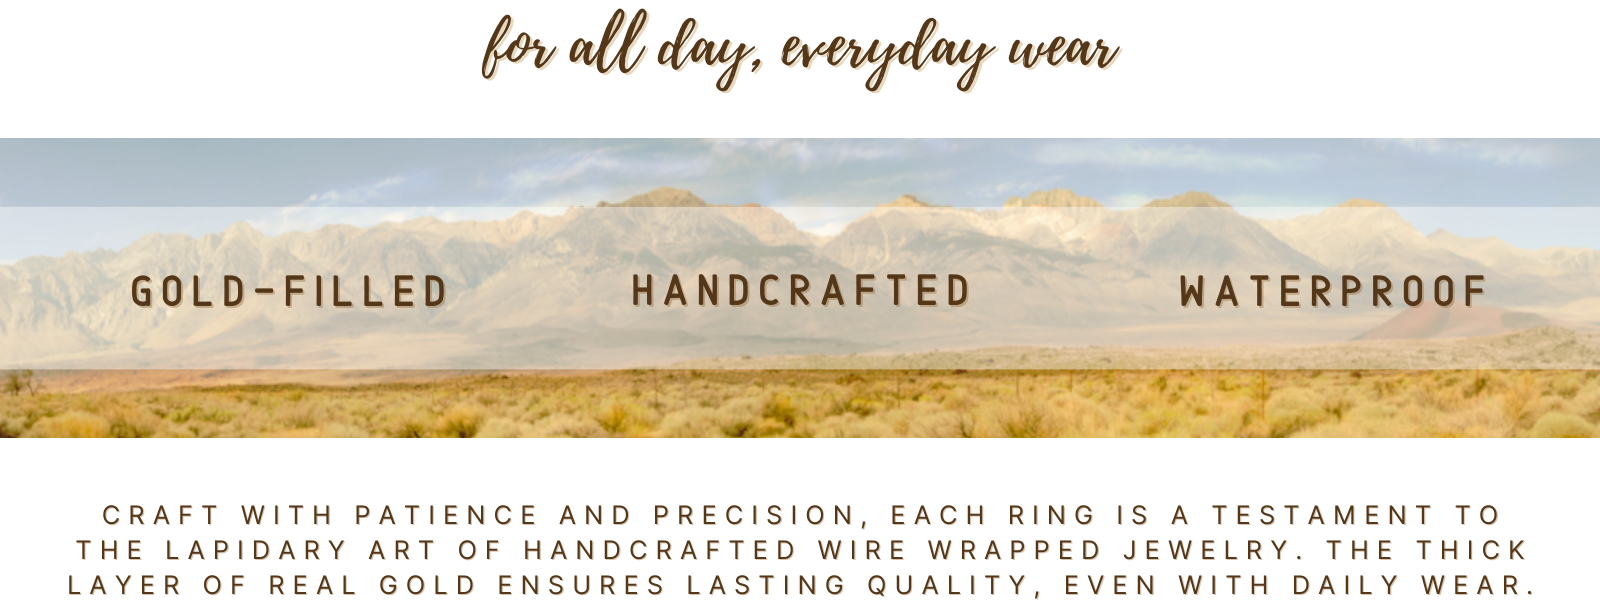 For all day, everyday wear. Craft with patience and precision, each ring is a testament to the lapidary art of handcrafted wire wrapped jewelry. The thick layer of real gold ensures lasting quality, even with daily wear.